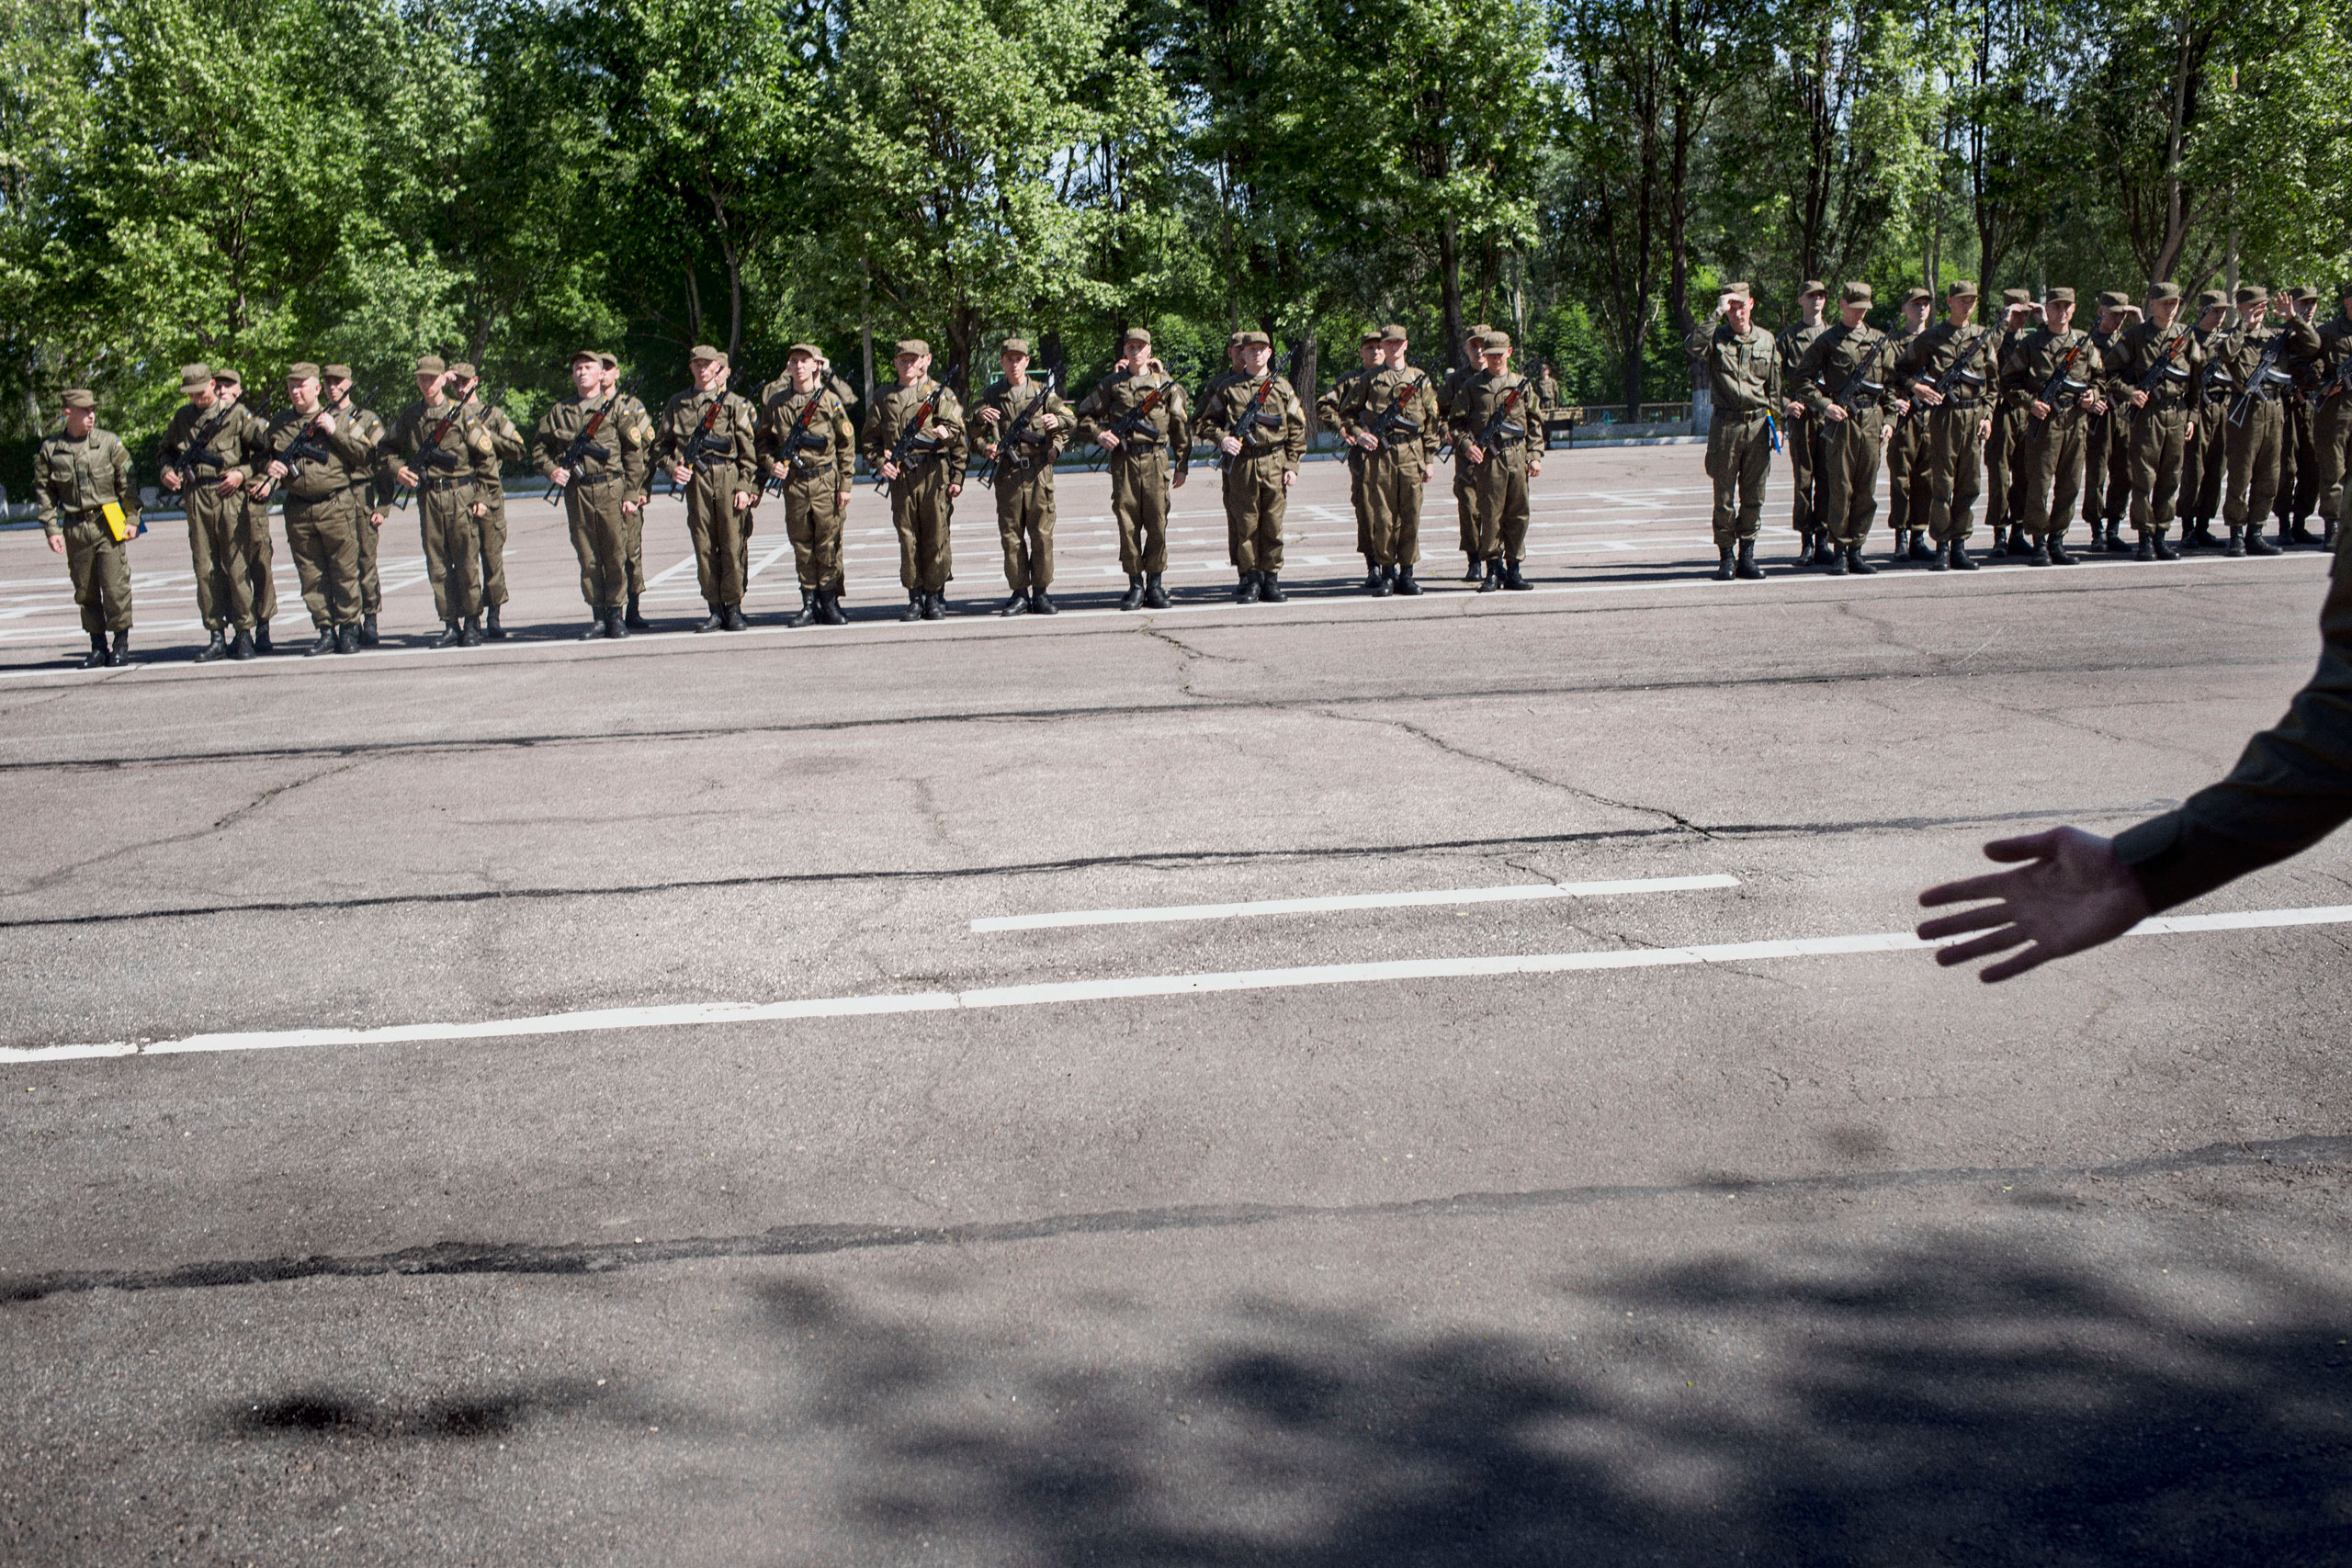 After several months of training, new recruits of Ukraine’s National Guard swear during a ceremonial oath. Zaporizhia, Ukraine. May 23, 2015.